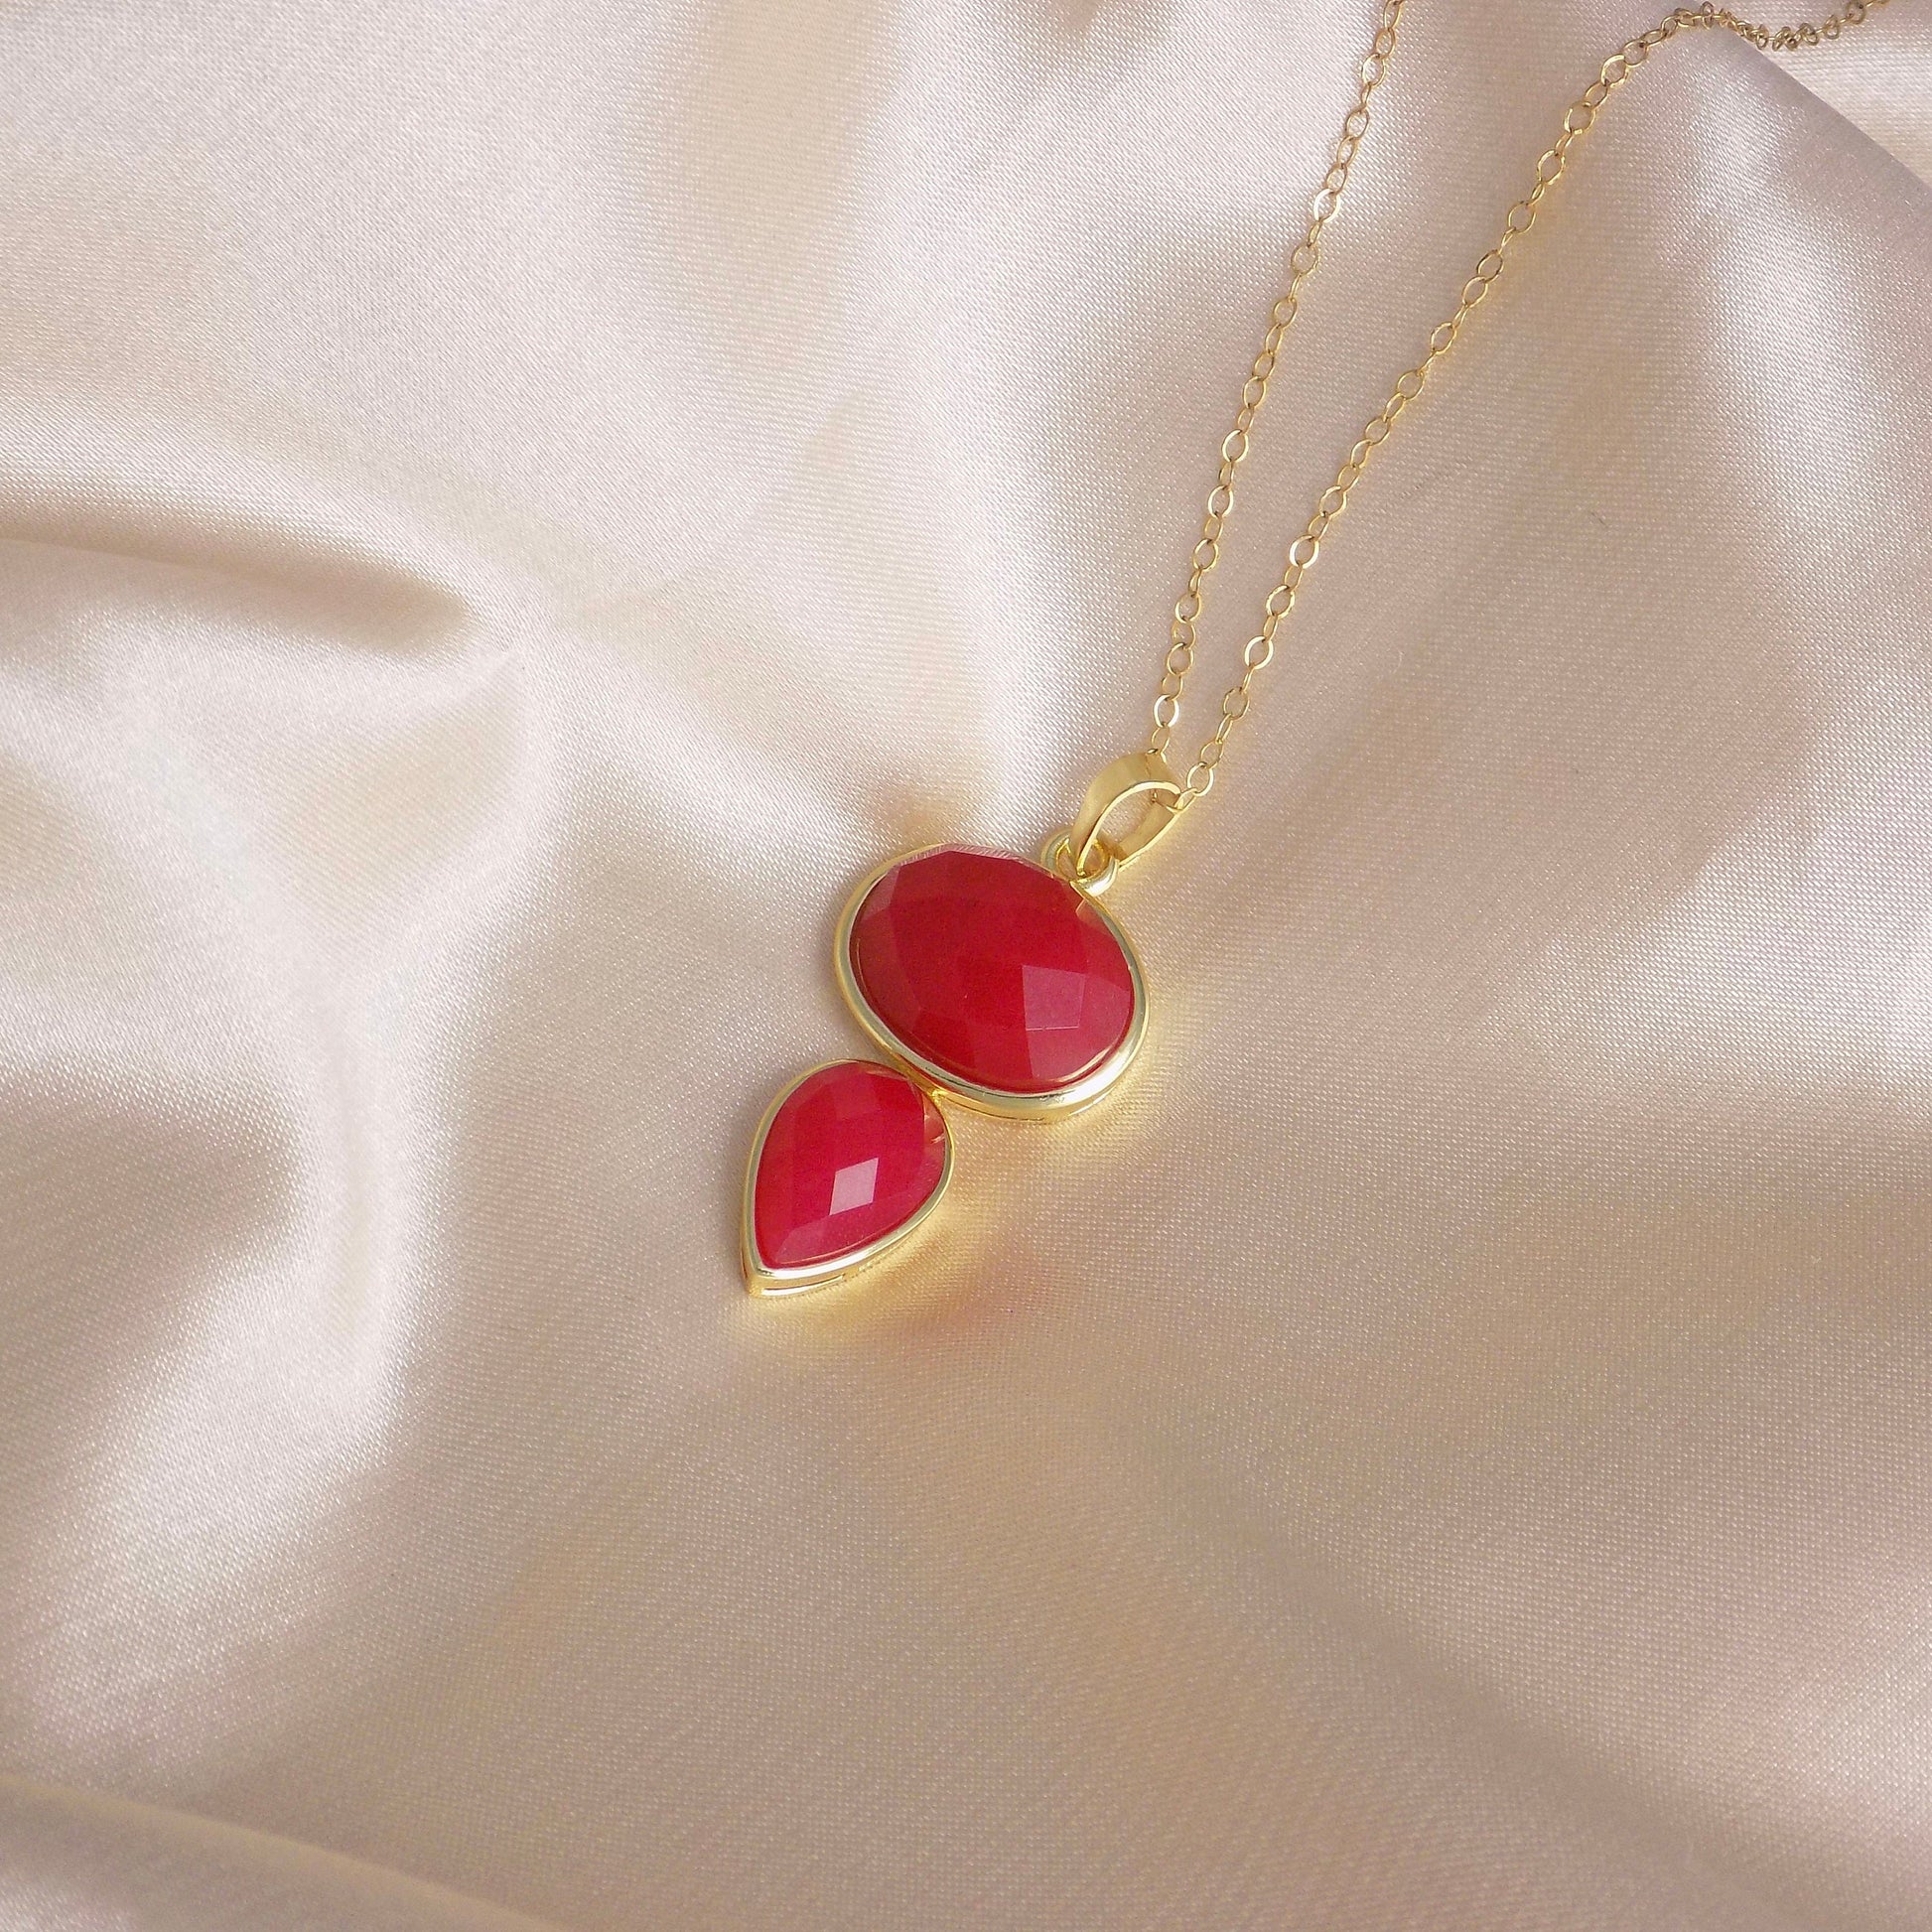 Unique Ruby Pendant Necklace Gold, July Birthstone, Gift For Mom, M7-52